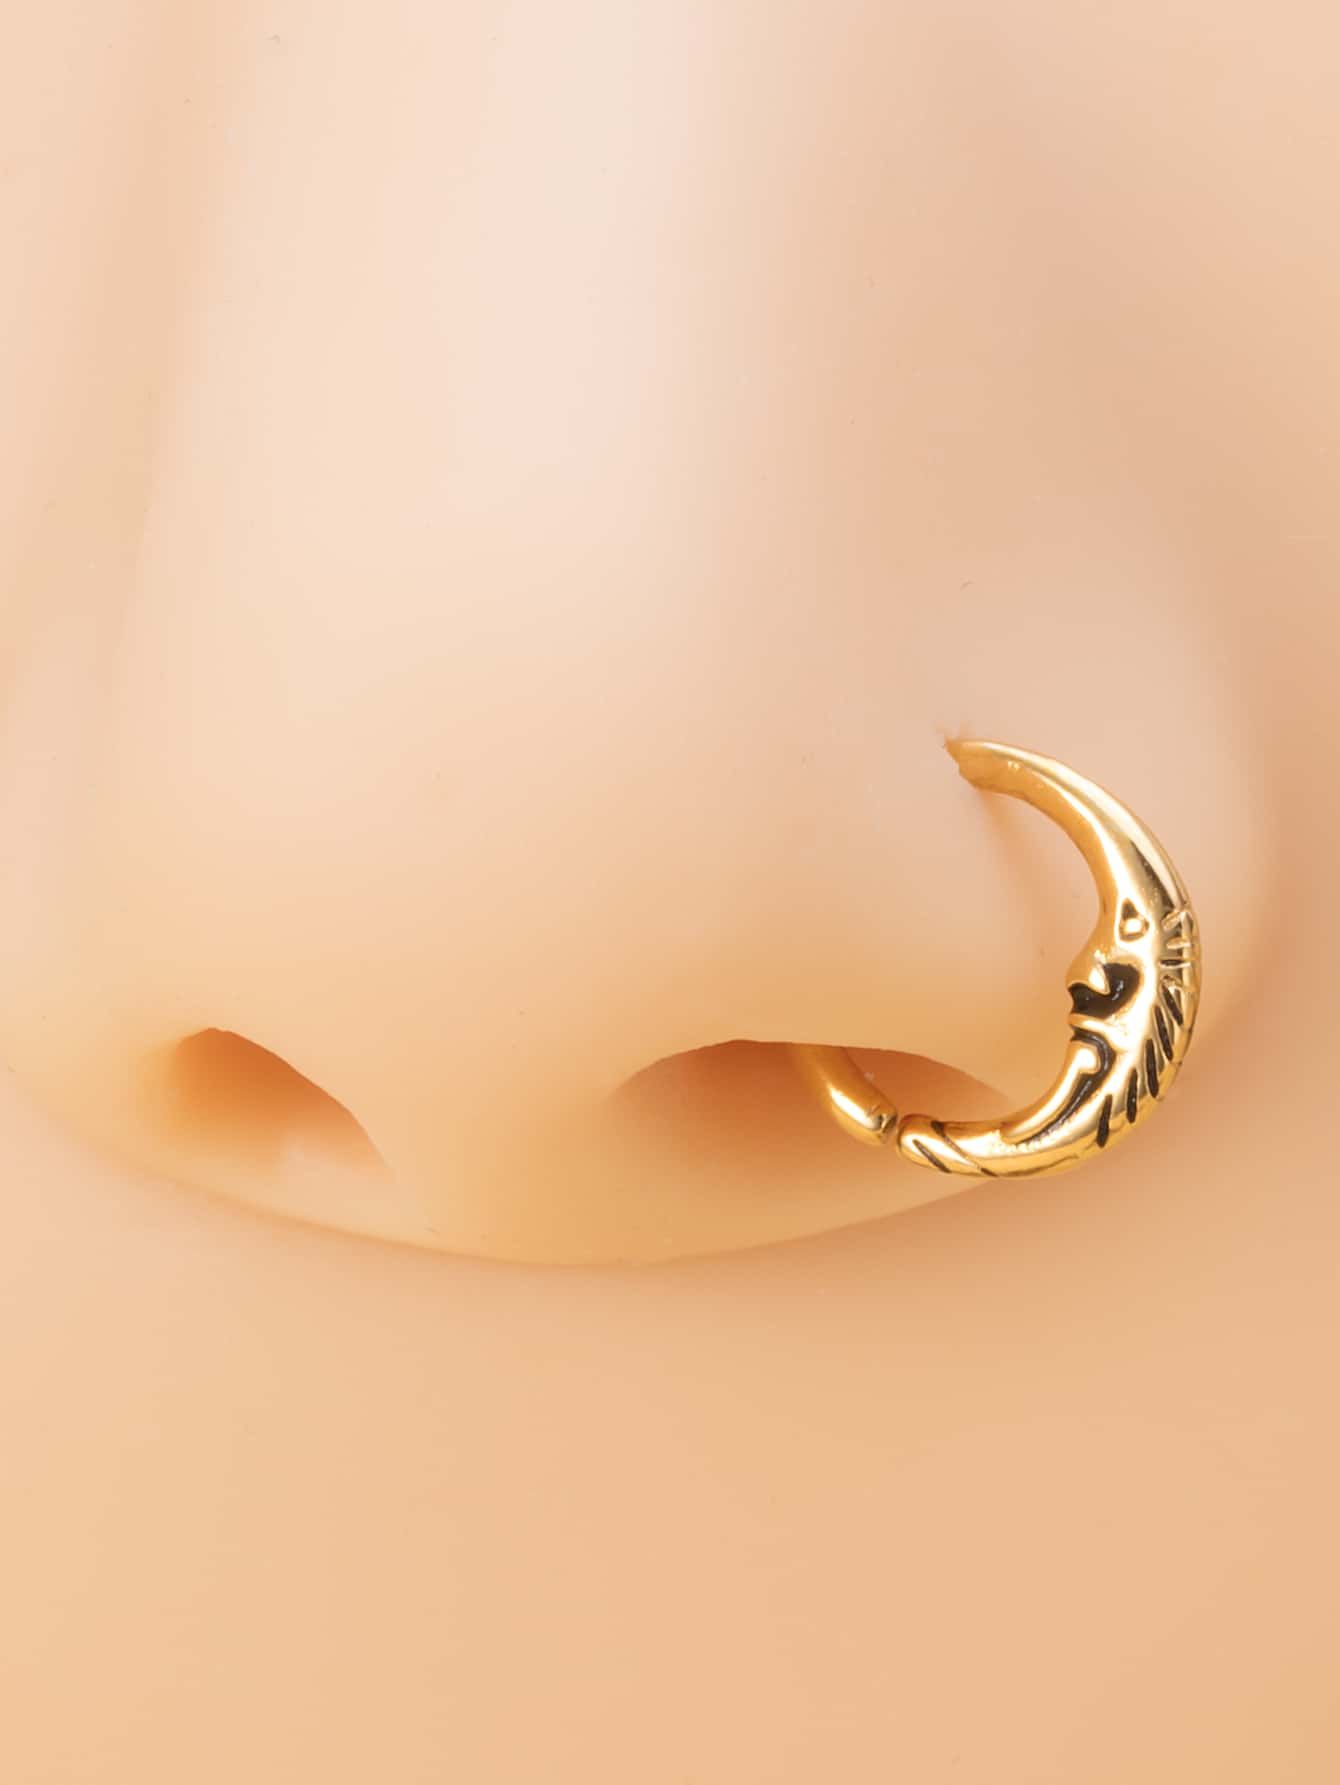 Add a Touch of Glamour with Gold Nose Rings